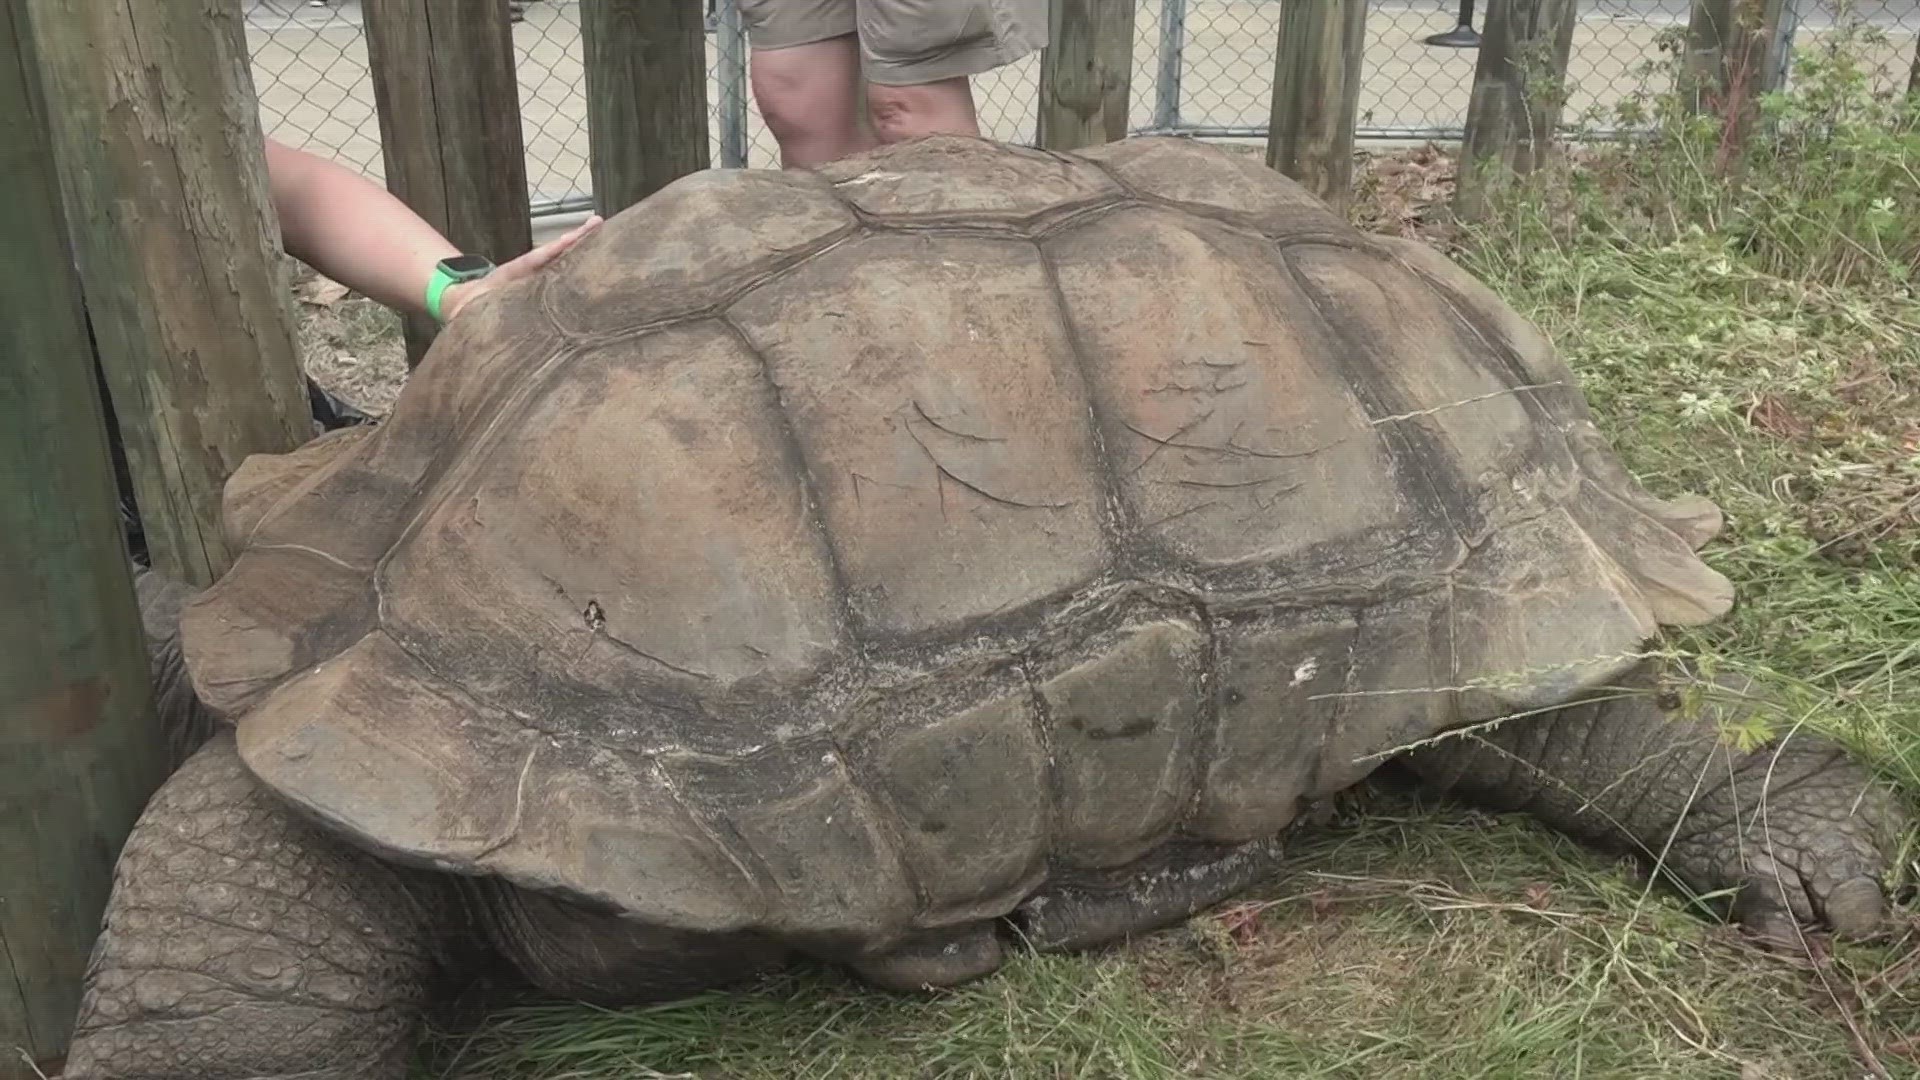 "Big Al" is an Aldabra Giant Tortoise, one of three males and two female Aldabra tortoises that live at the zoo.